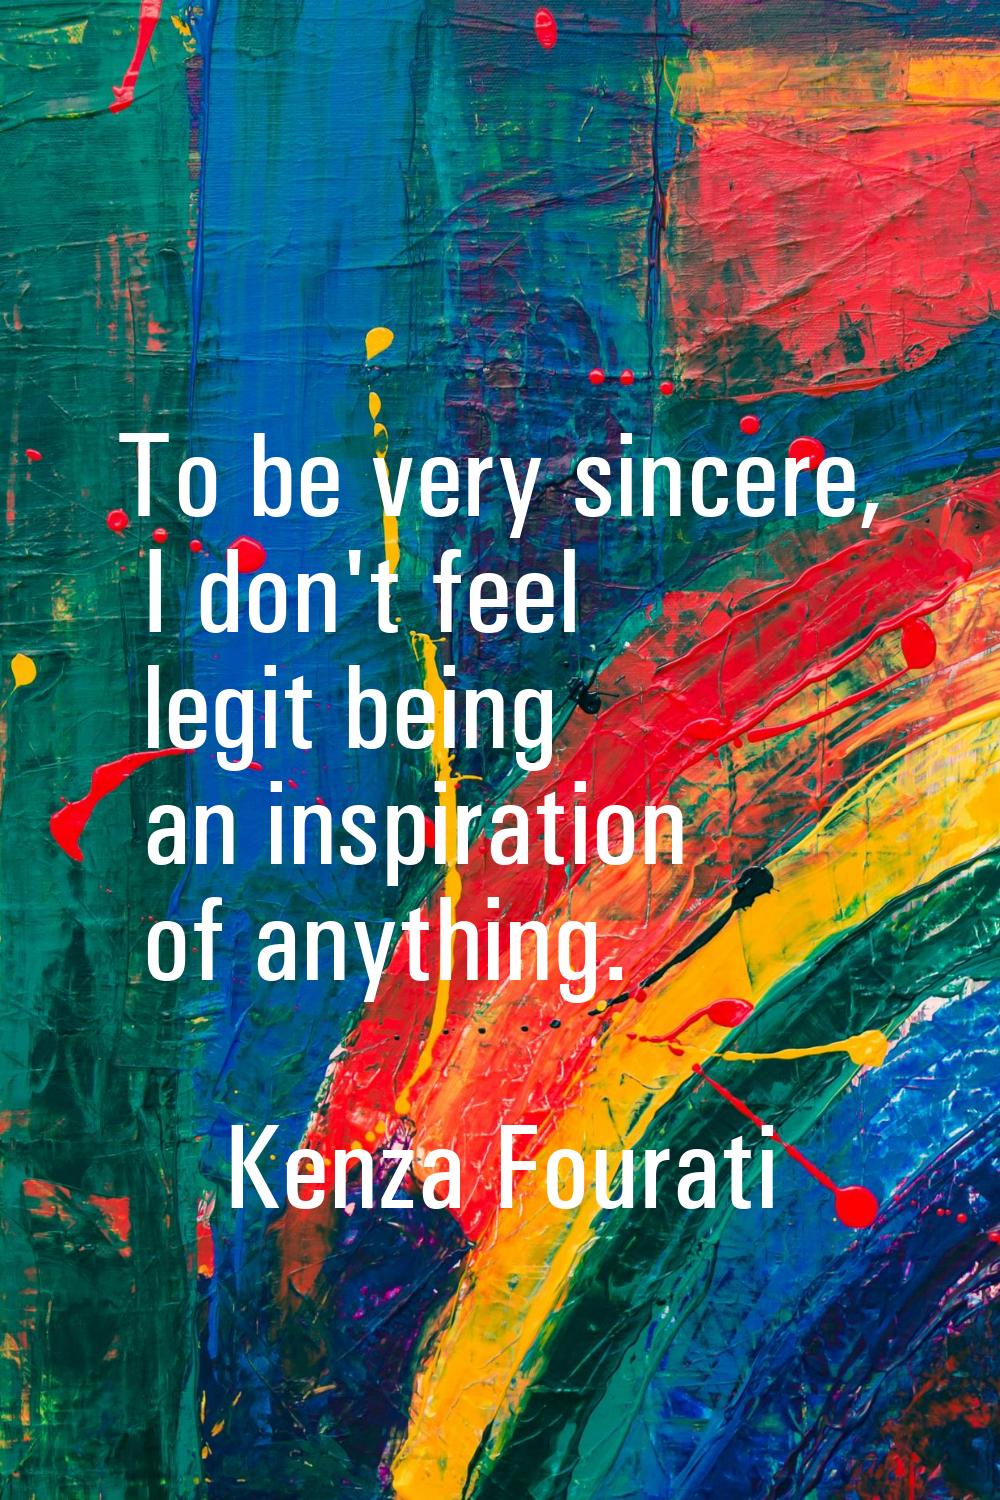 To be very sincere, I don't feel legit being an inspiration of anything.